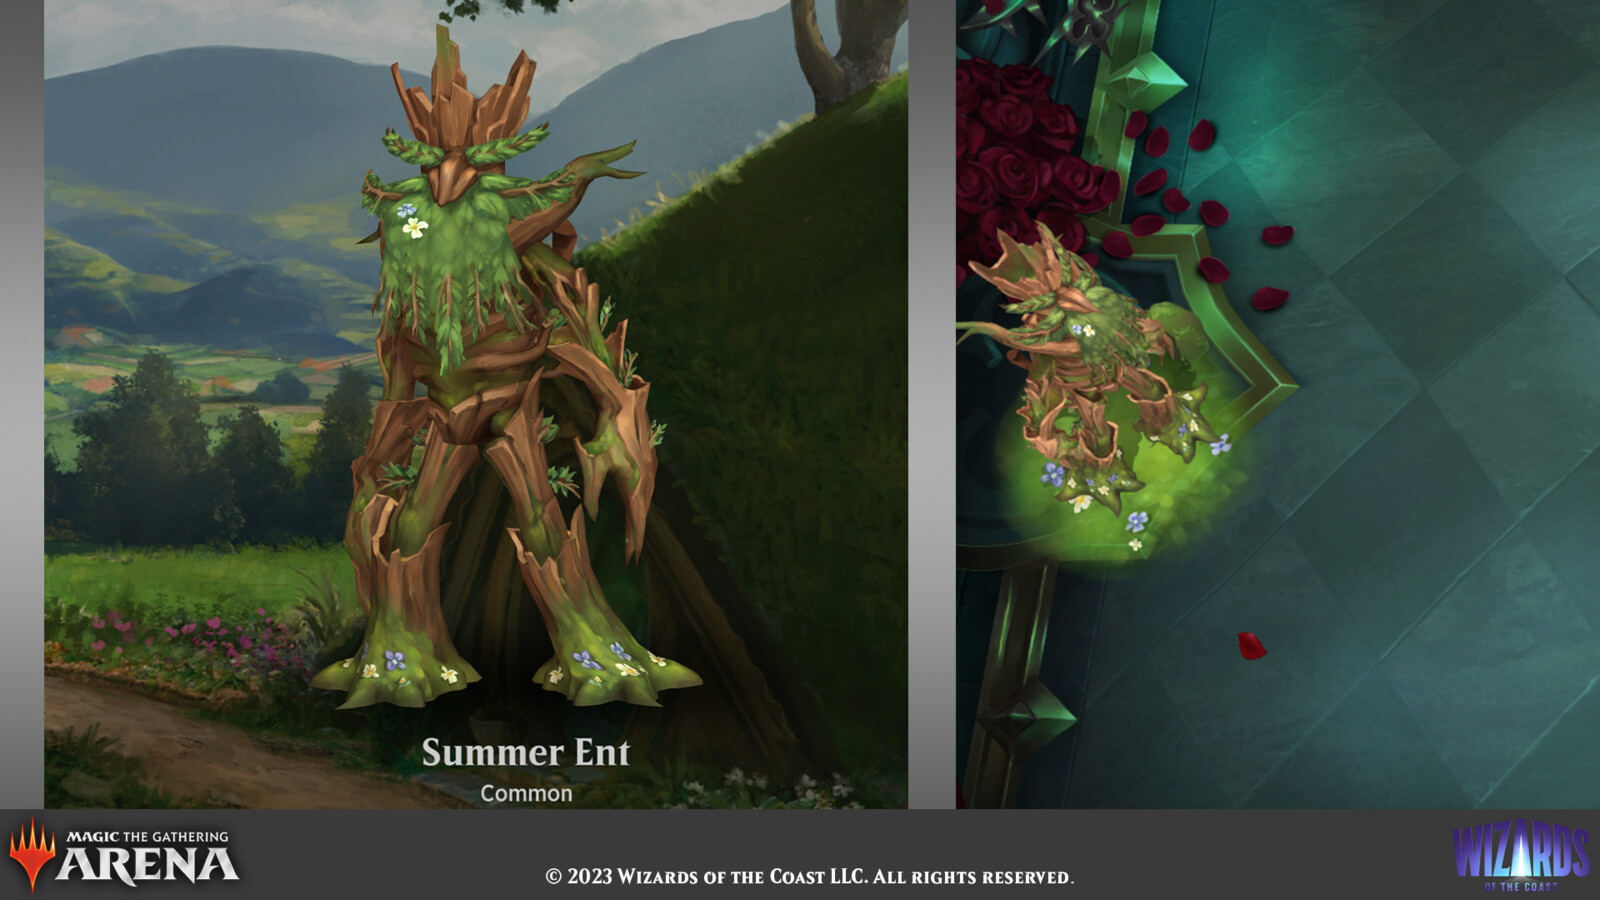 Select pet and game views for the Summer Ent